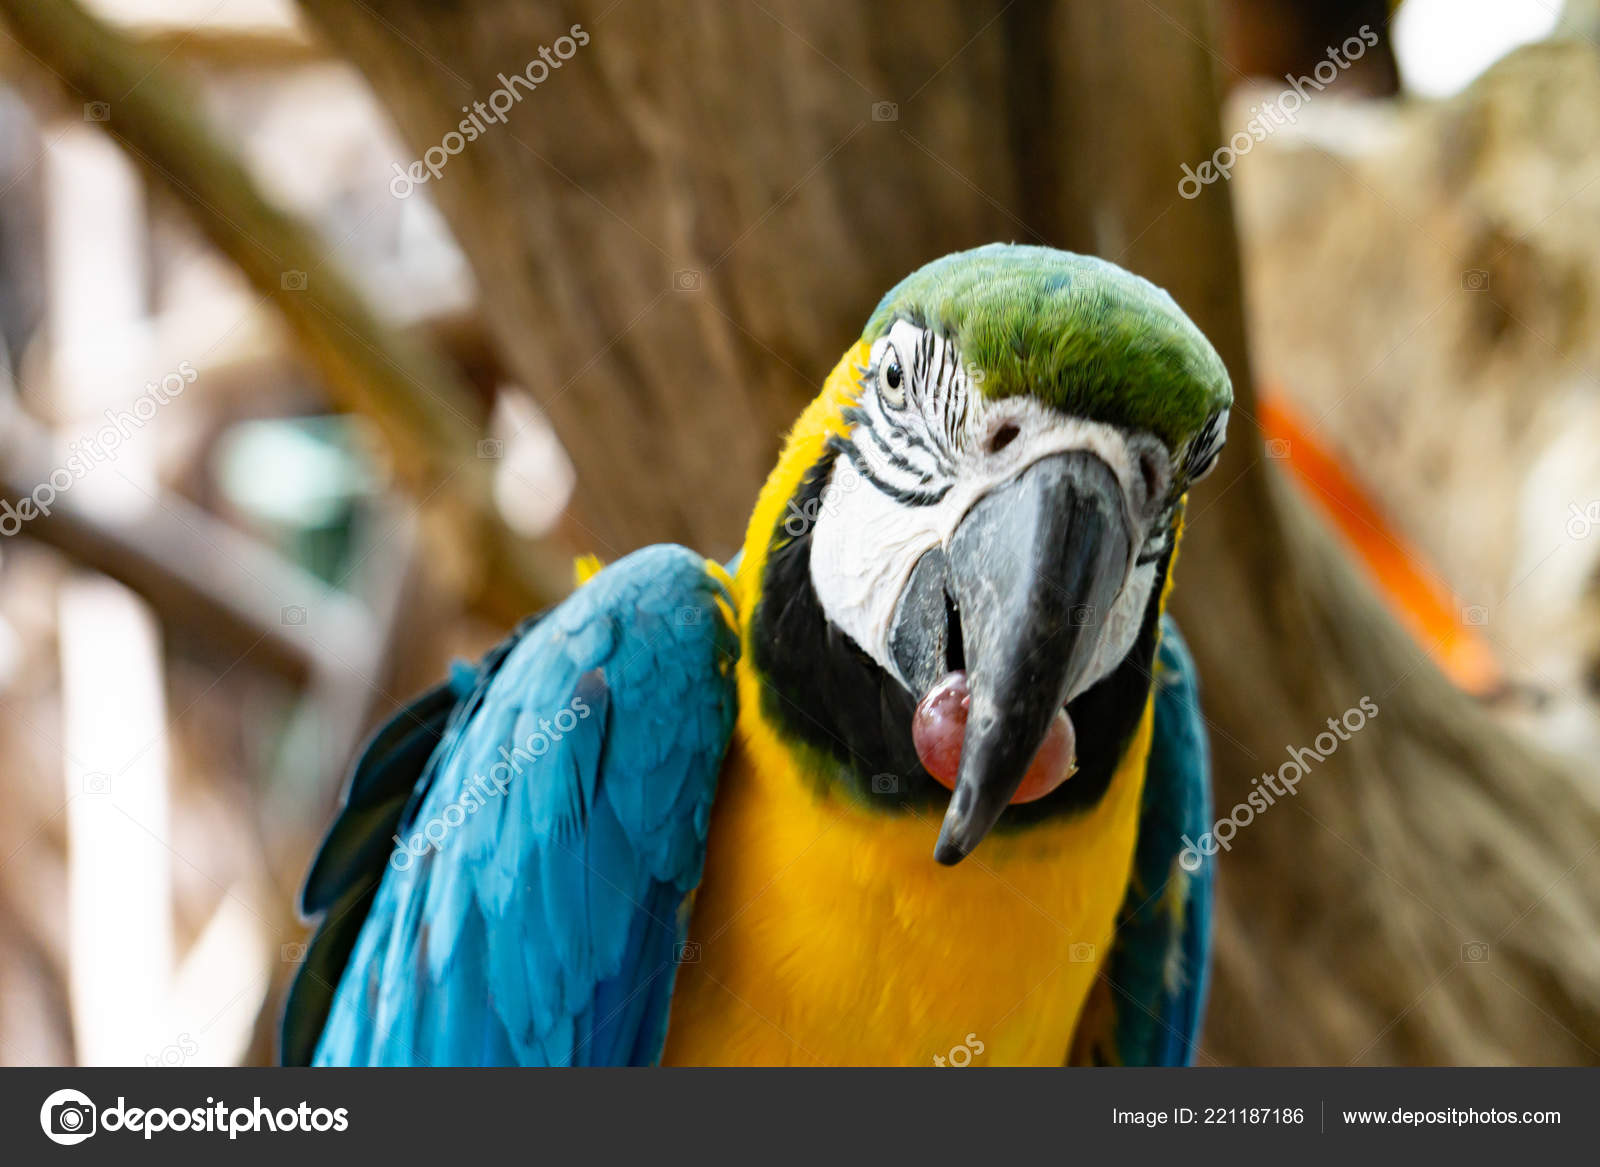 Severe Macaw Parrot Close Chestnut Fronted Macaw Stock Photo C Khoblaun 221187186,Spanish Coffee